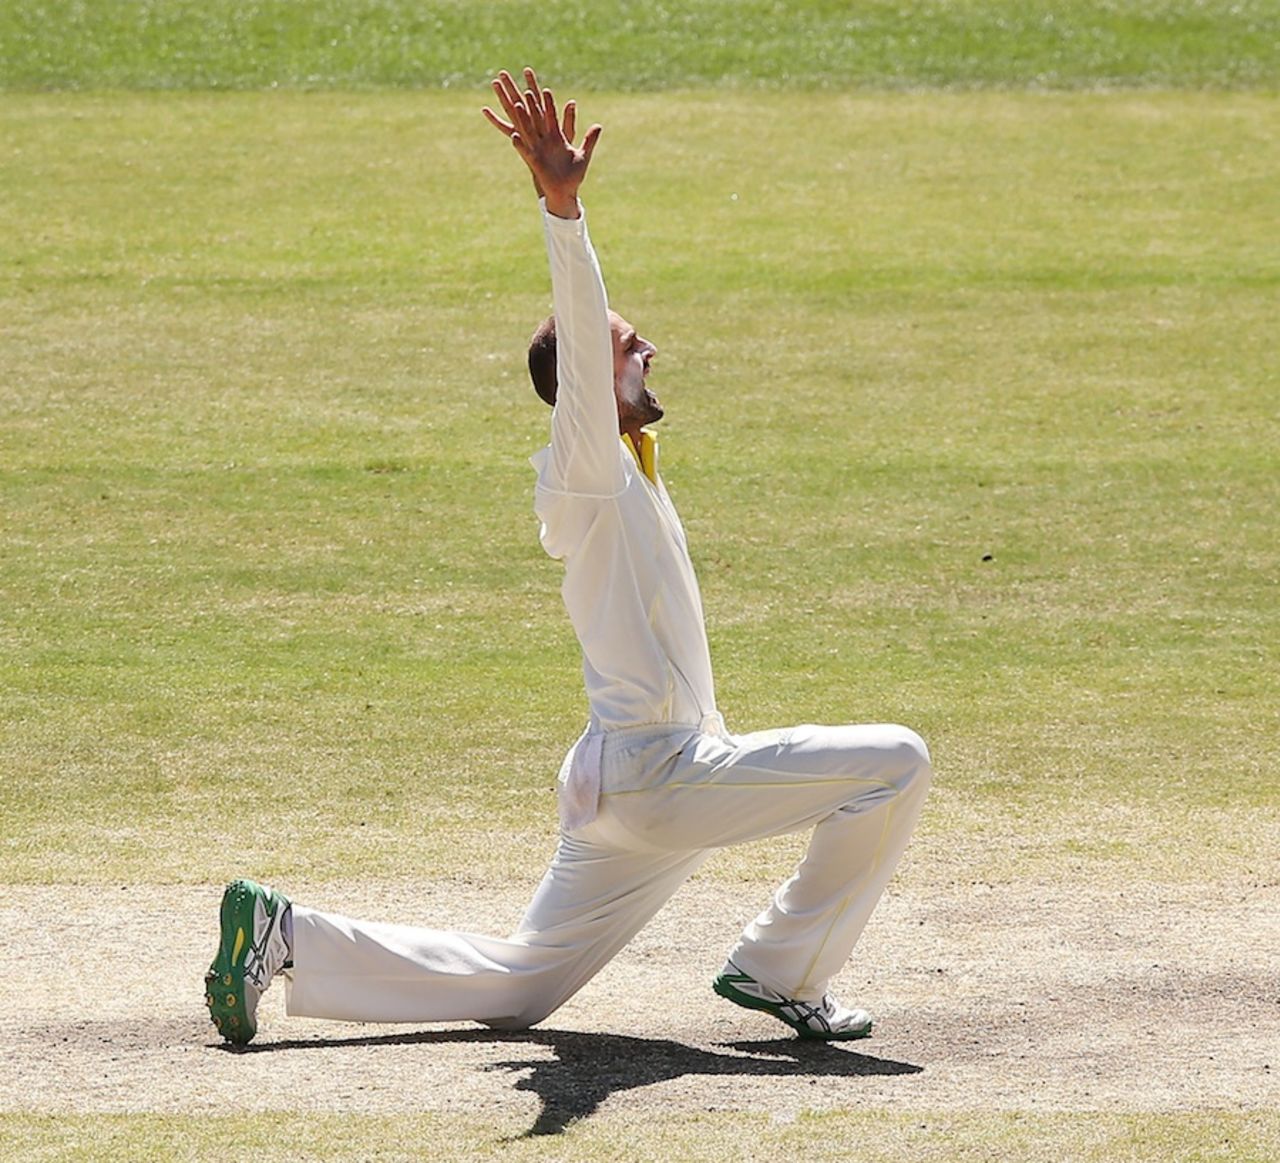 Nathan Lyon appeals for M Vijay's wicket, Australia v India, 1st Test, Adelaide, 5th day, December 13, 2014